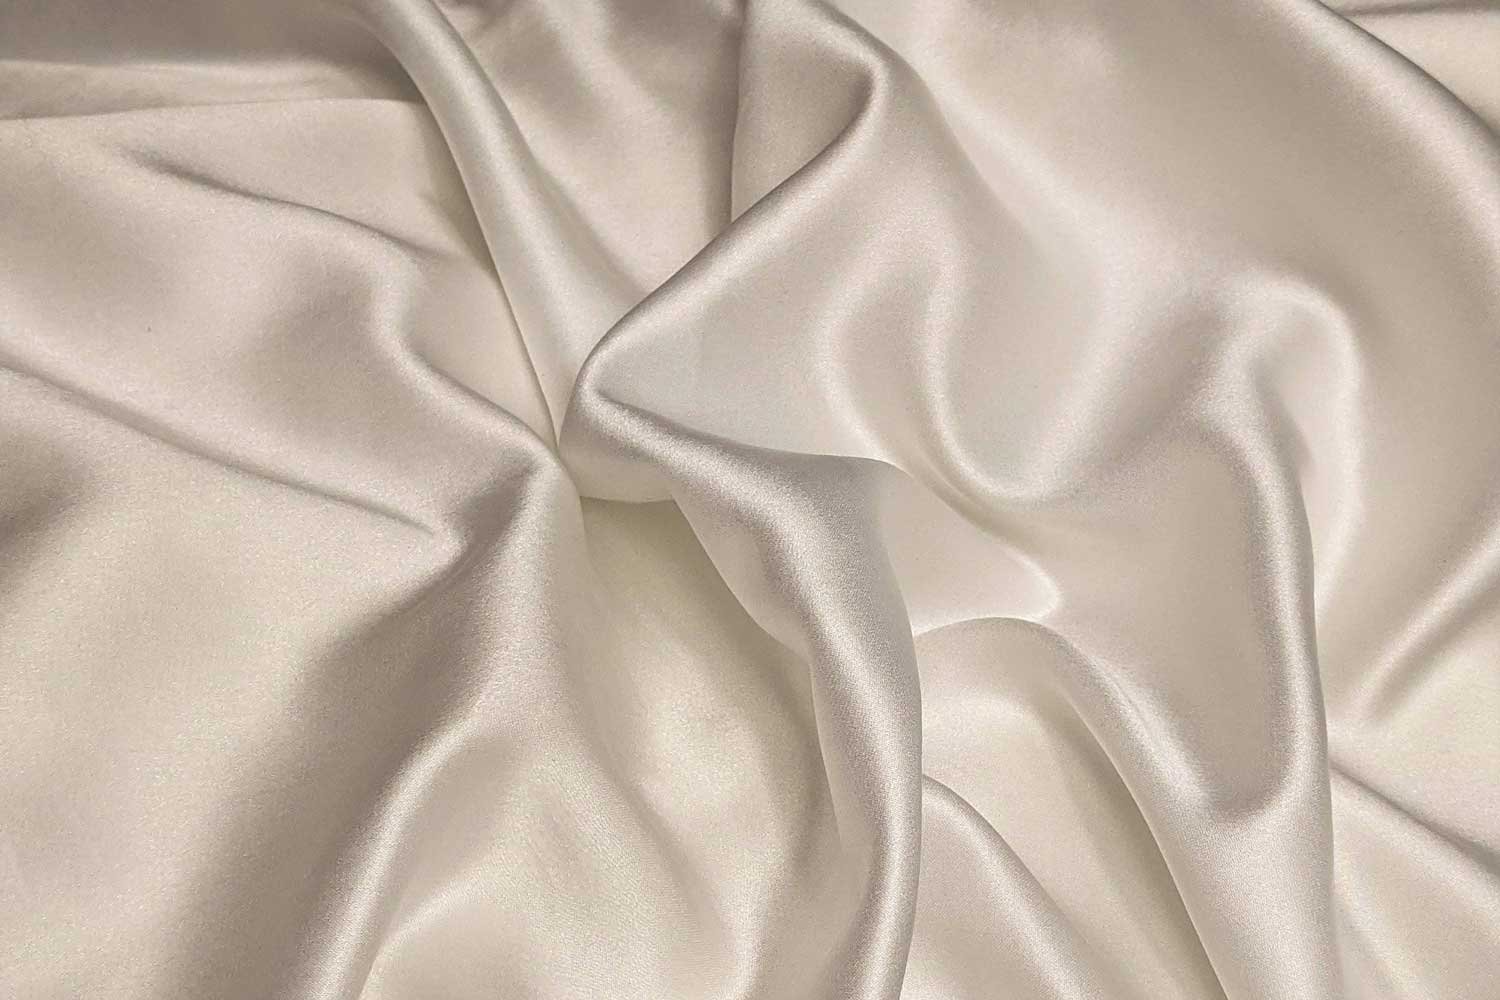 Modal is a type of rayon made from beech tree fibers. It is known for its softness, breathability, and ability to resist shrinking. Modal fabric is lightweight, moisture-wicking, and provides excellent airflow, making it a good choice for hot and humid climates.